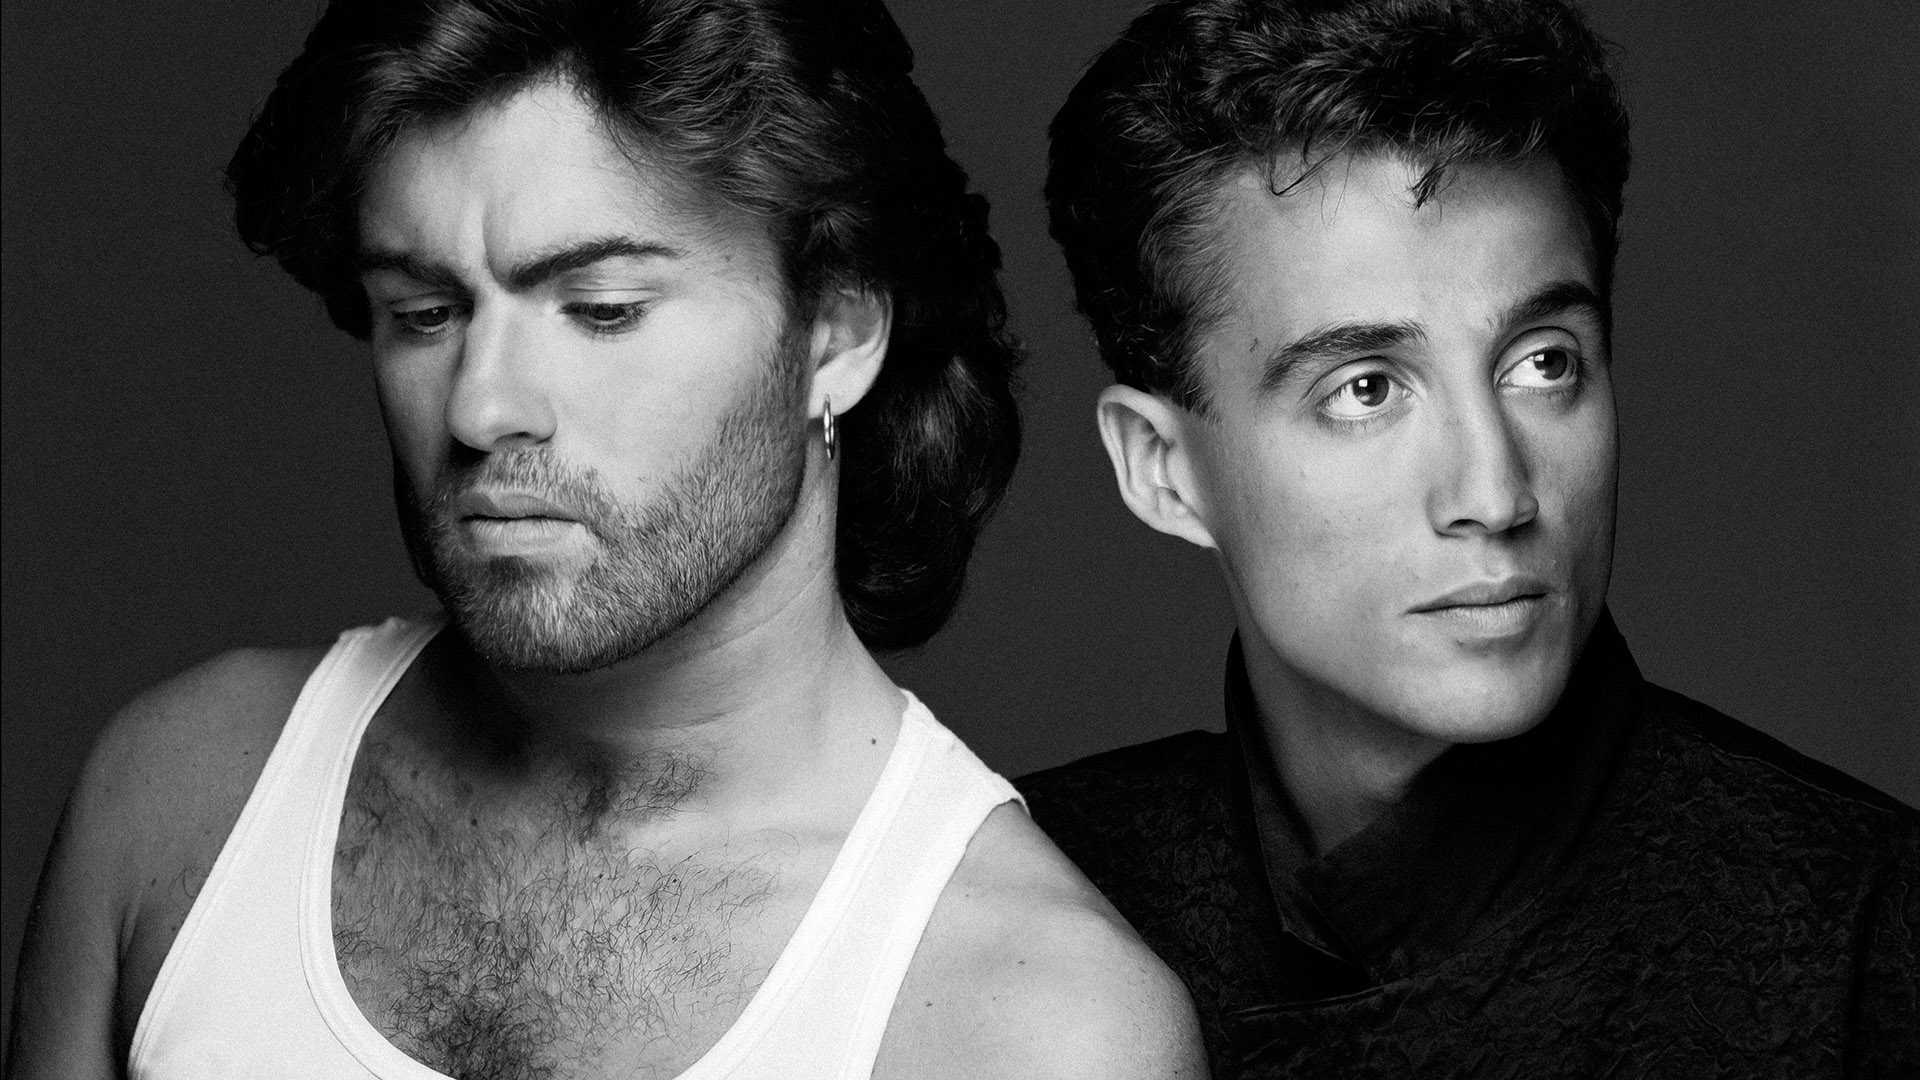 Wham! in 1986